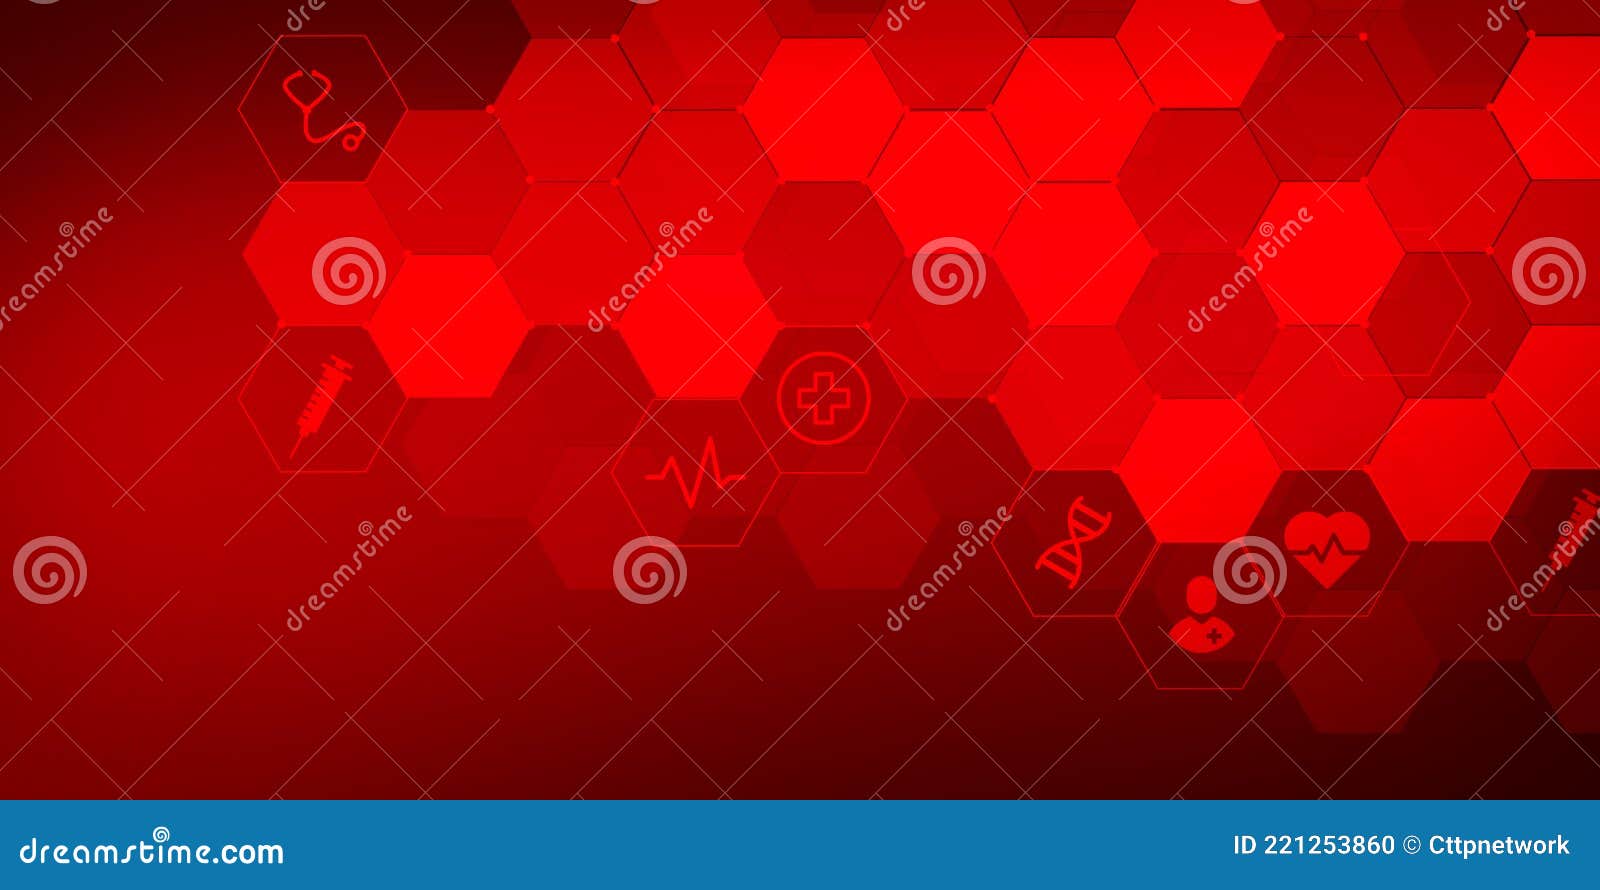 Healthcare And Medical Wallpaper With The CT Scann image Stock Photo,  Picture and Royalty Free Image. Image 36243894.